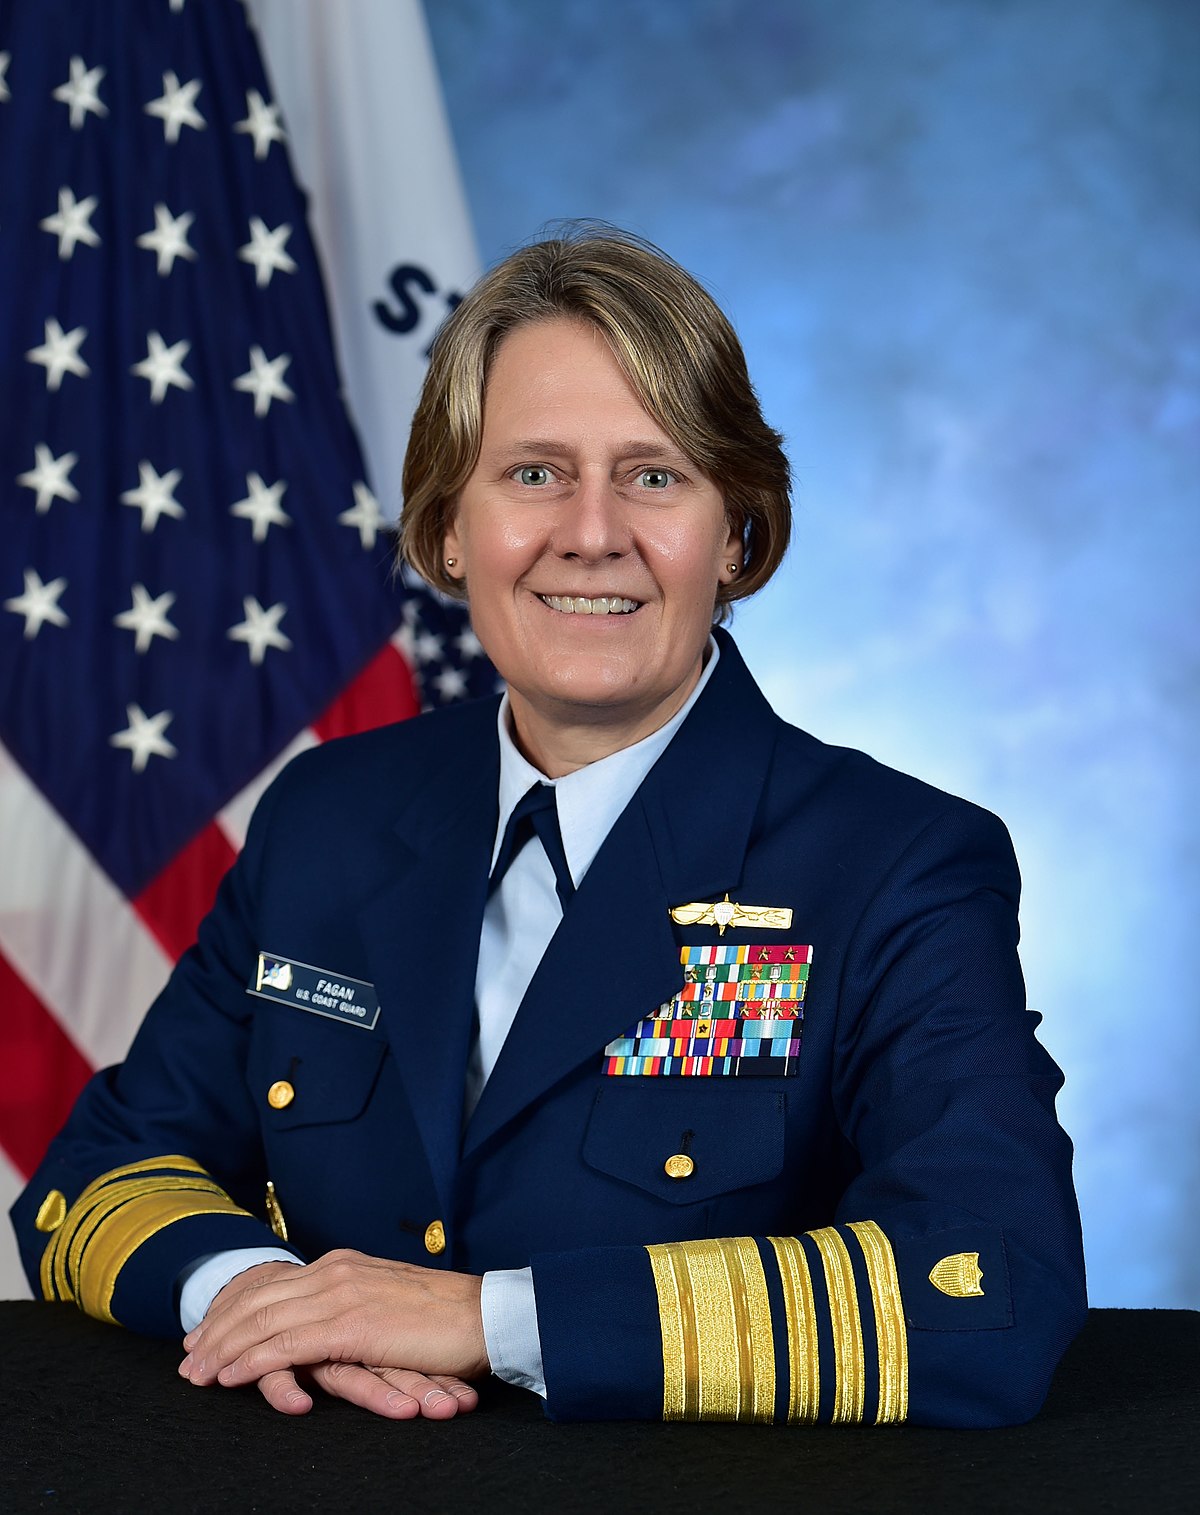 Women in the United States Coast Guard